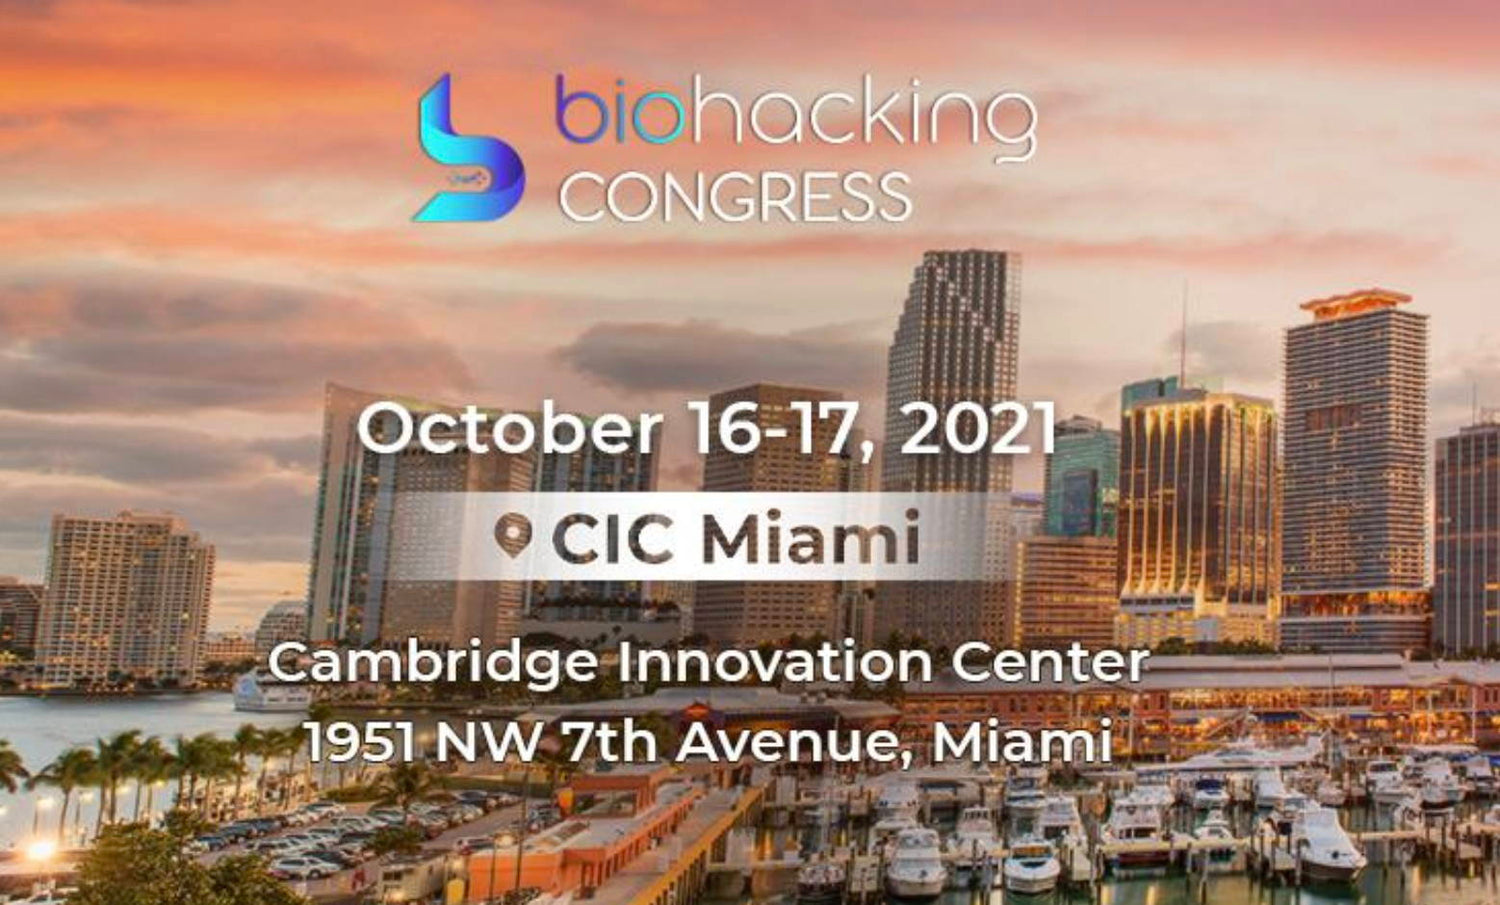 Biohacking congress in Miami focused on cellular health and the benefits of spermidineLIFE.